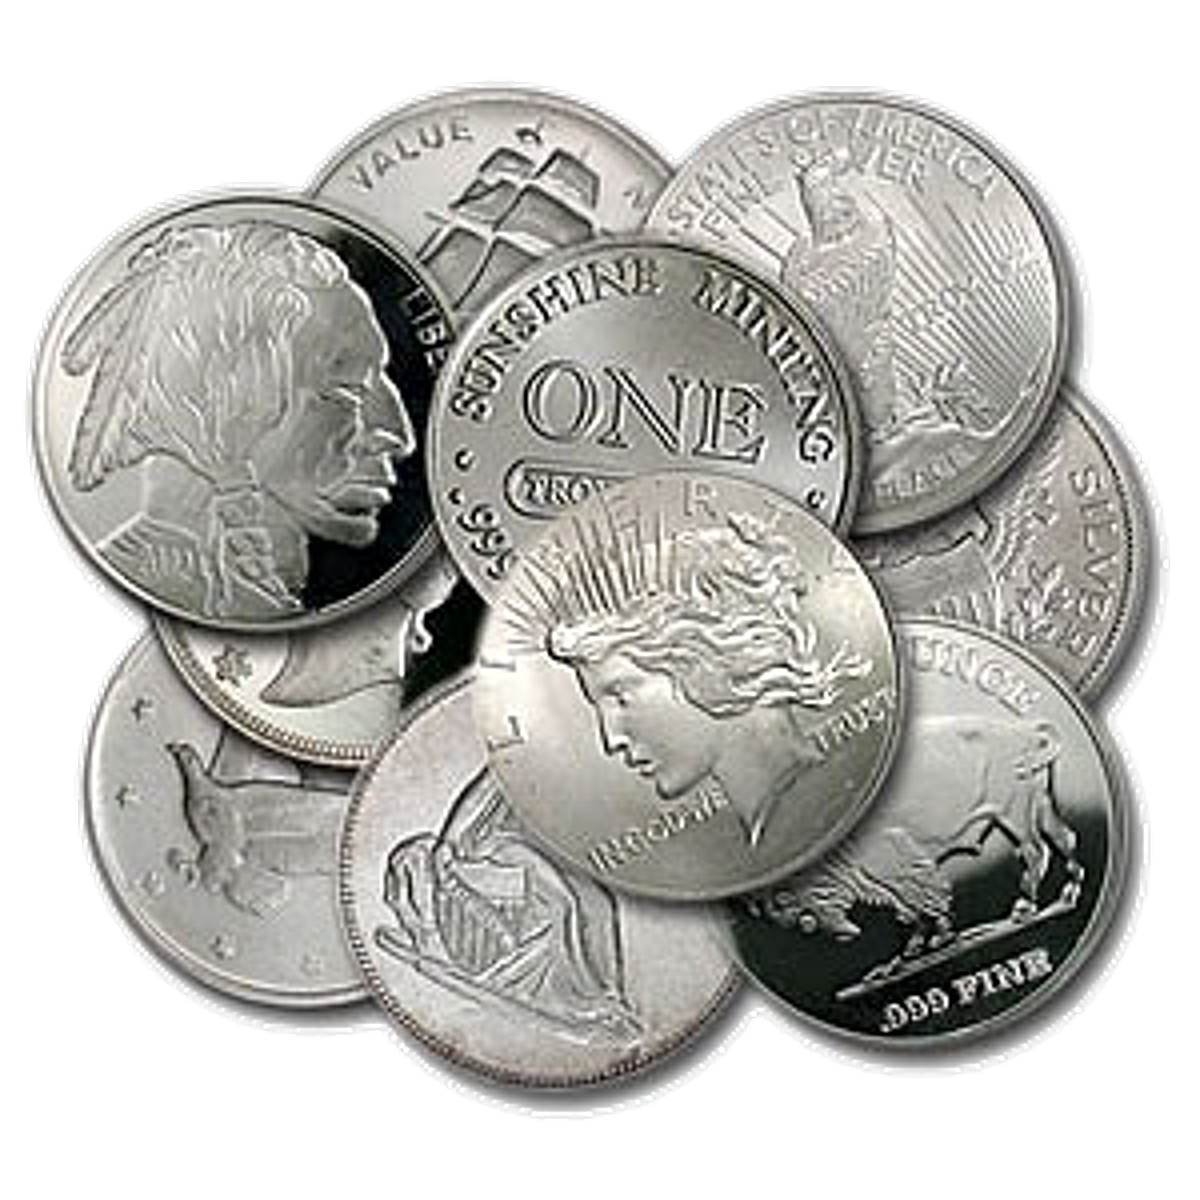 Generic Silver Rounds - Various Designs - 1 oz